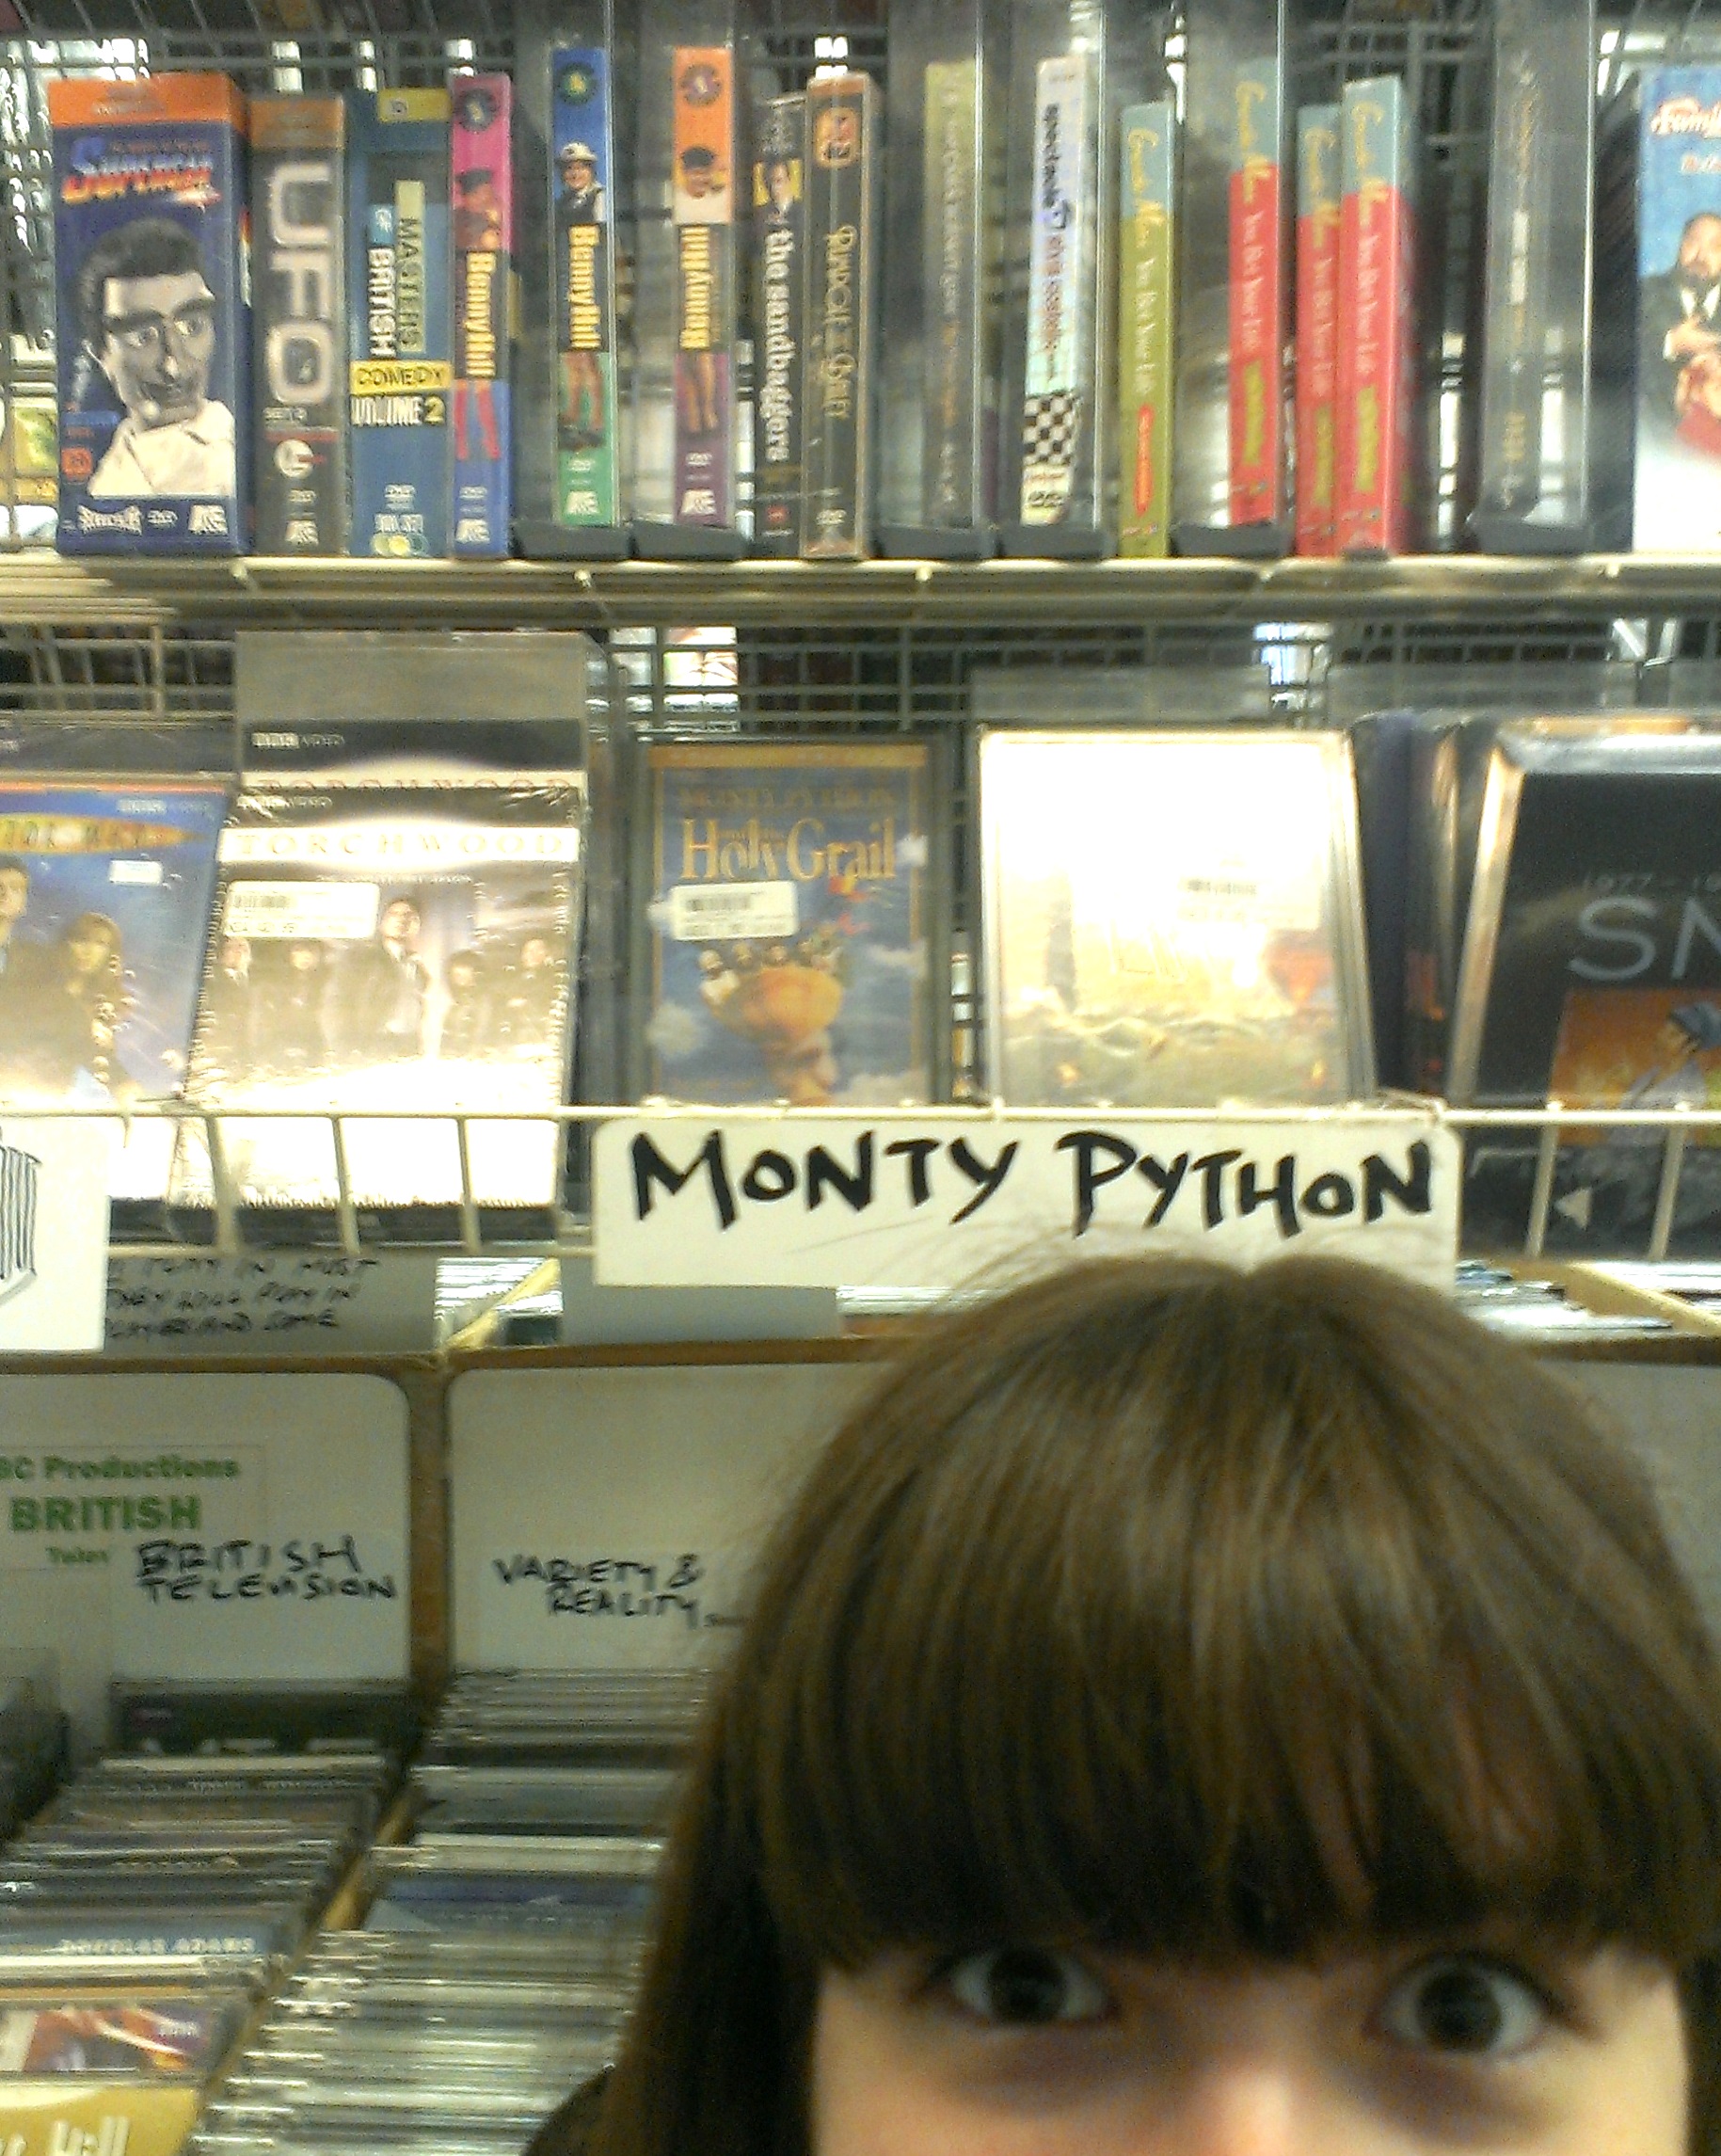 Lauren in the Monty Python section